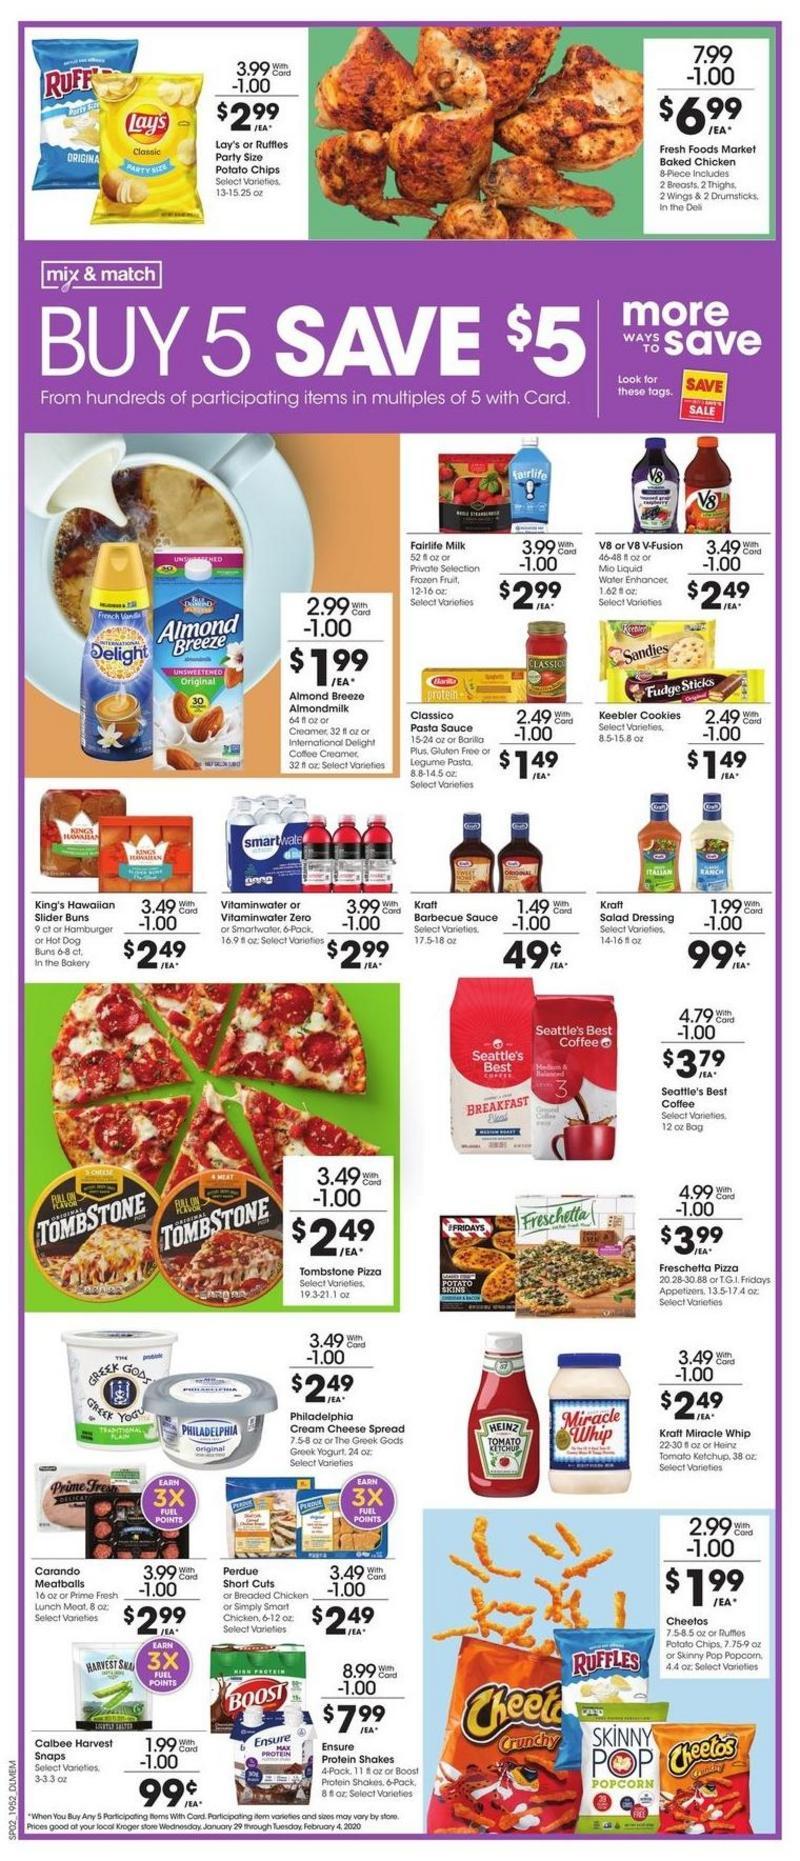 Kroger Weekly Ad from January 29